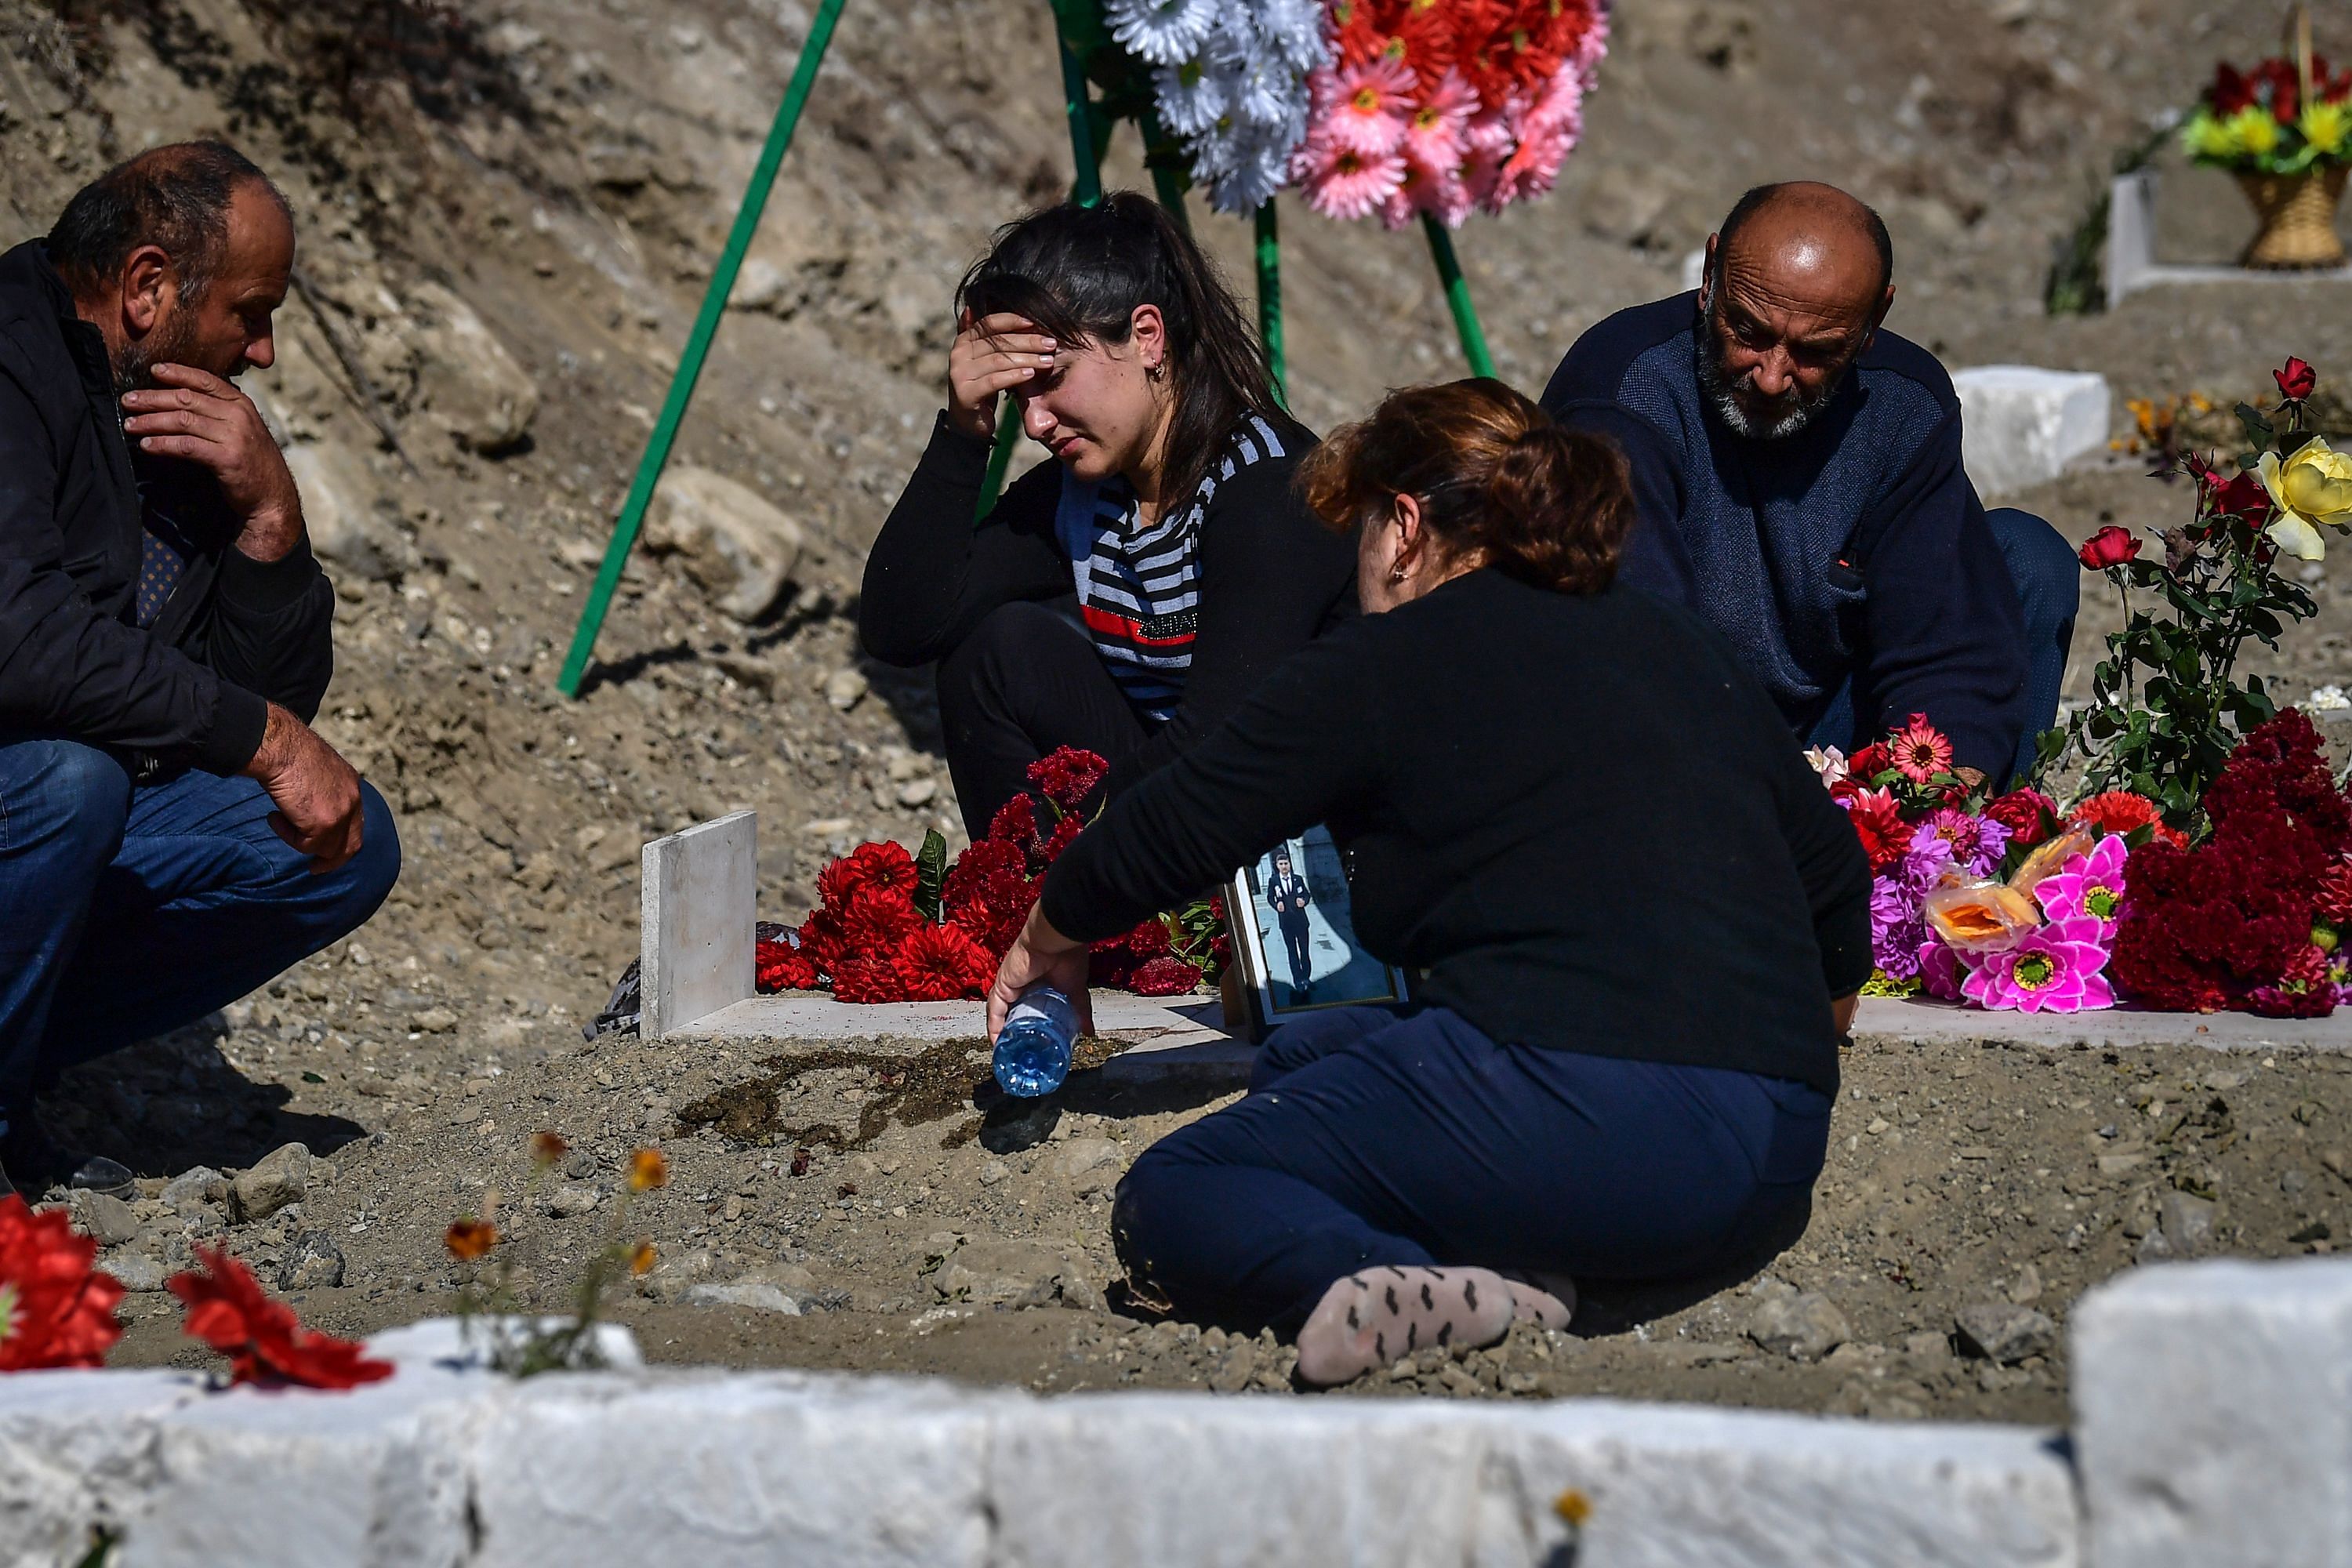 Relatives mourn by the grave of a fighter in Stepanakert during fighting over the breakaway region of Nagorno-Karabakh. Credits: AFP Photo